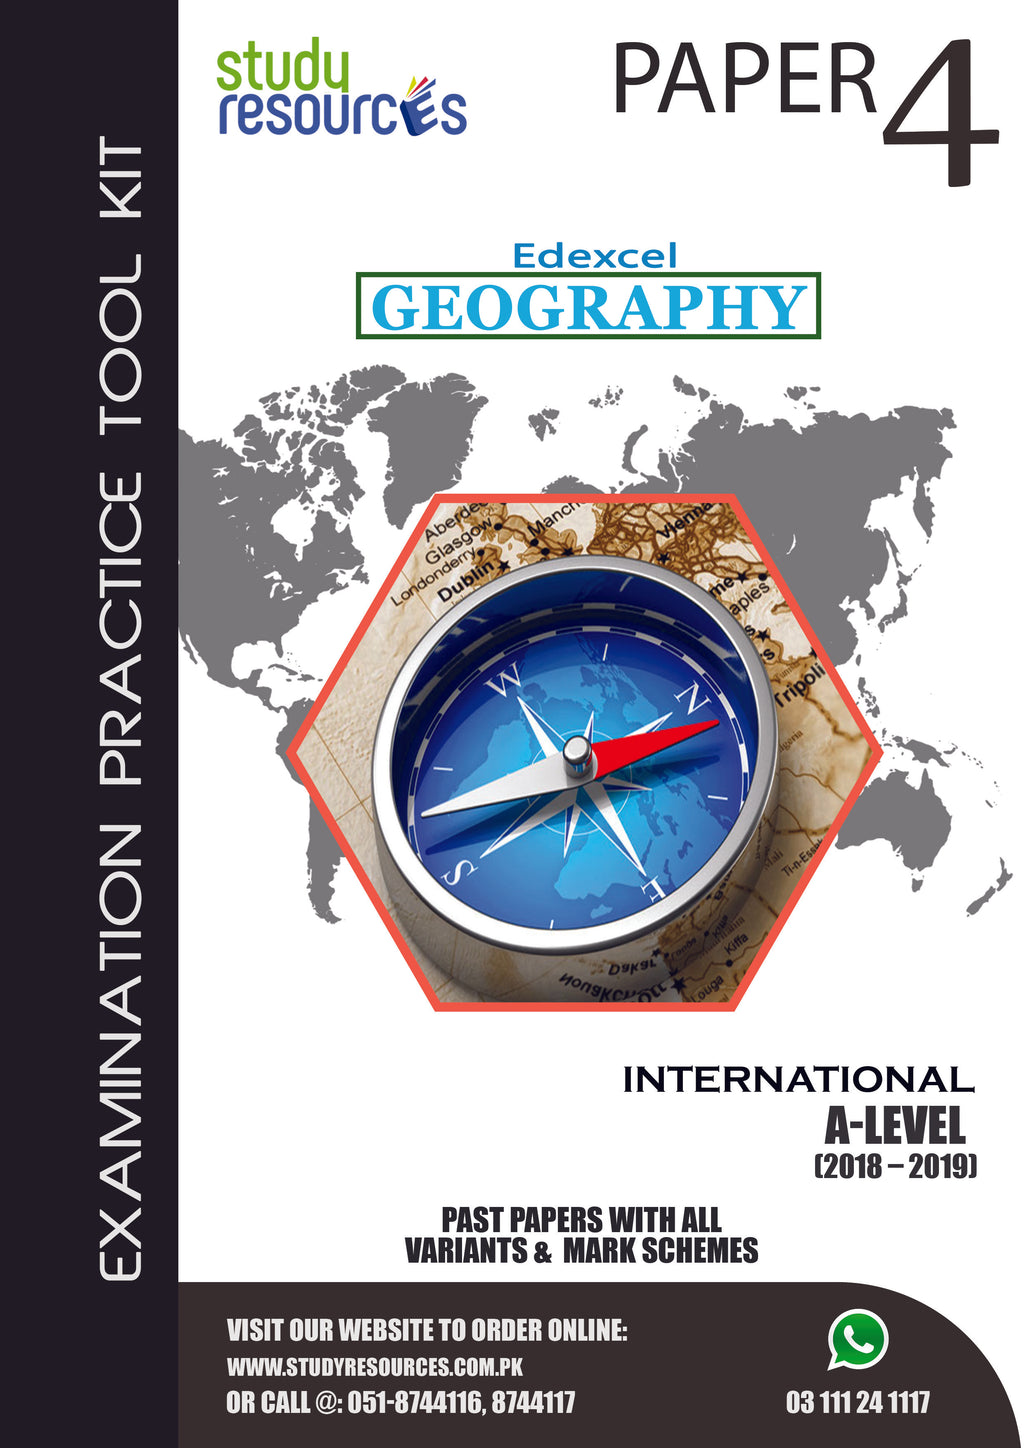 Edexcel A-Level Geography P-4 Past Papers (2018-2019)